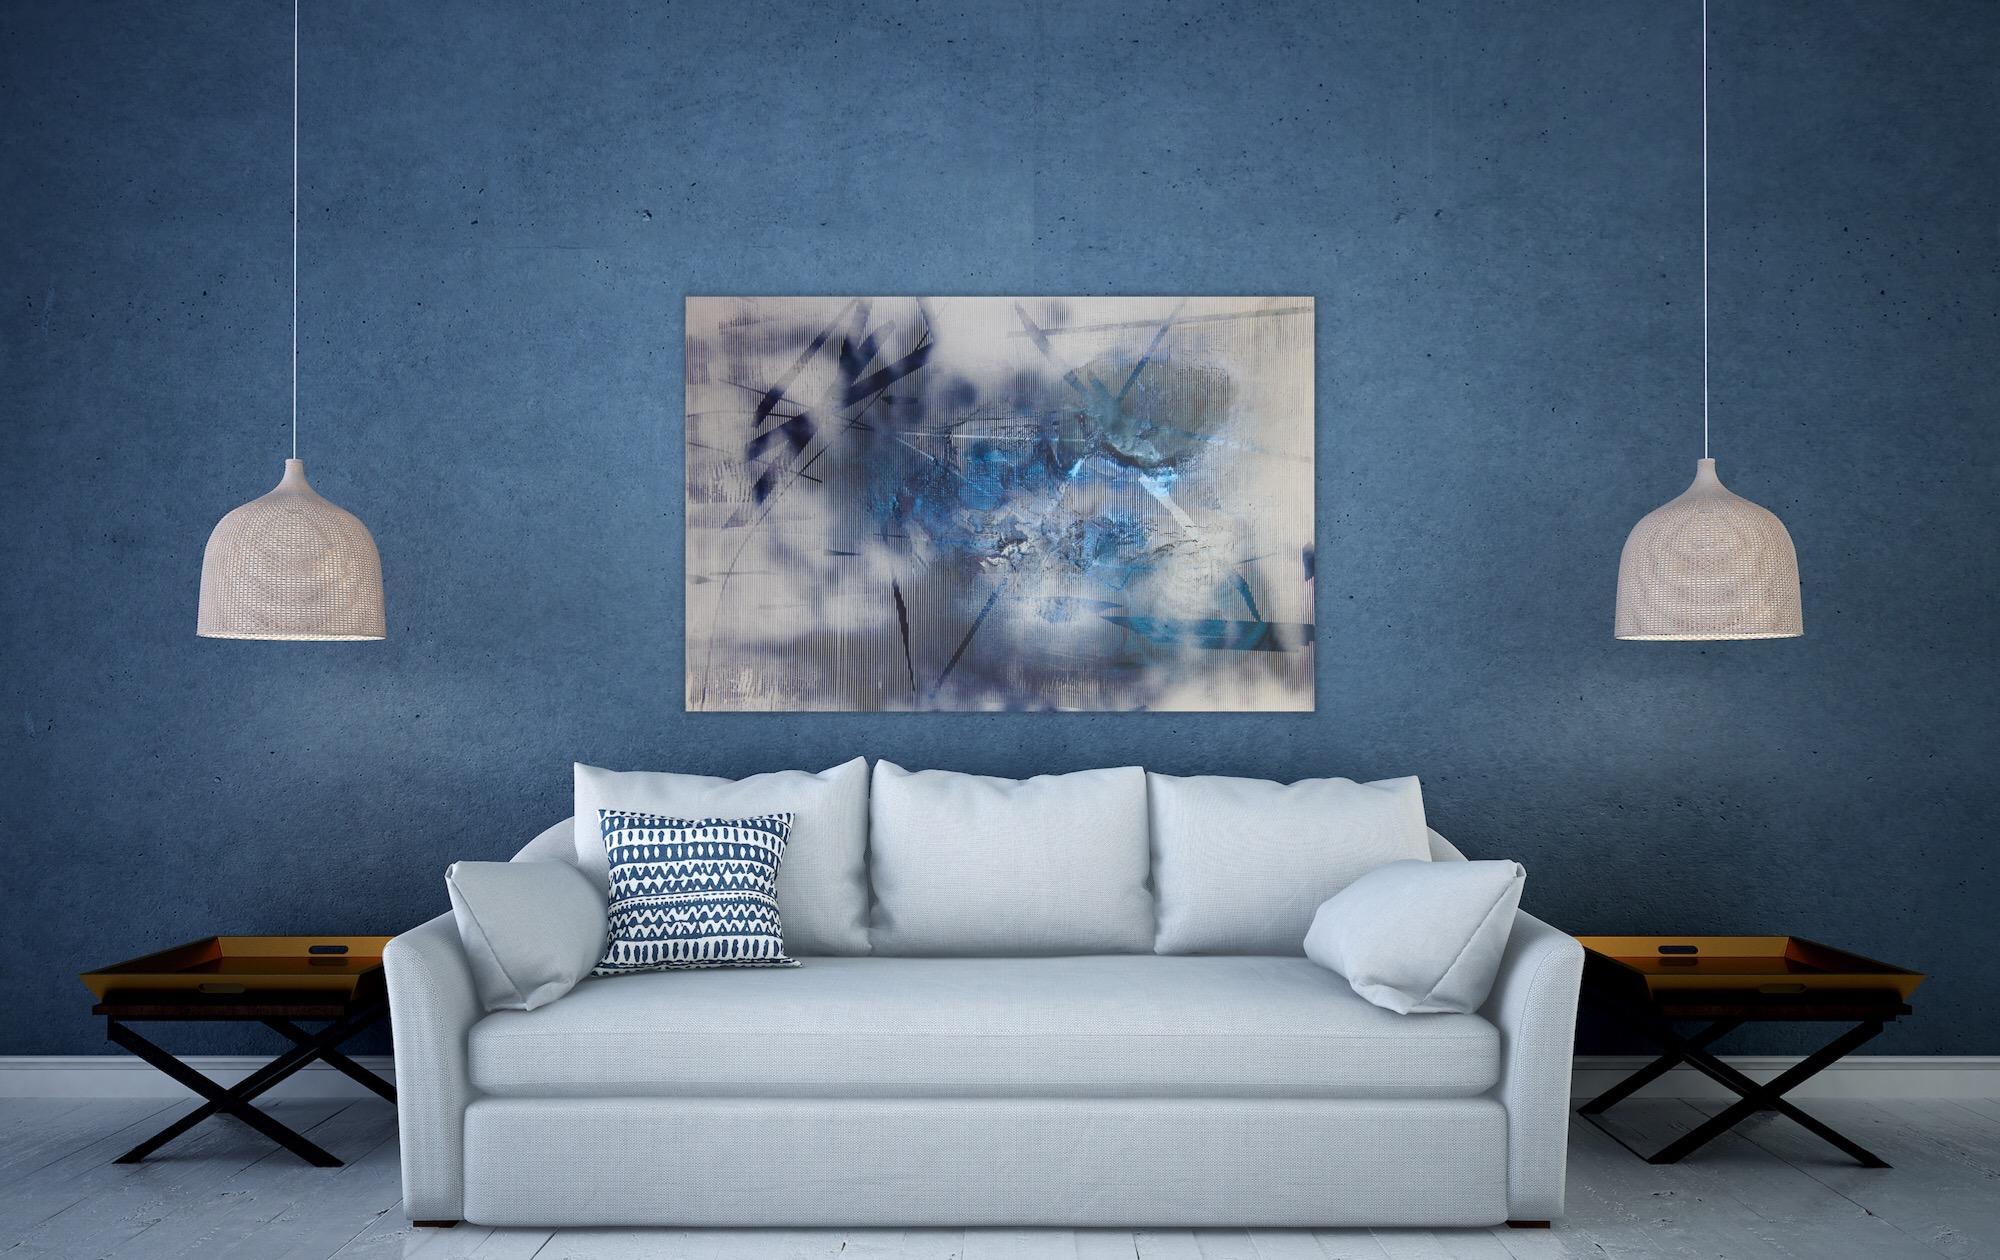 Screen tbd4 (abstract grid painting contemporary blue white atmospheric art) - Gray Abstract Painting by Melisa Taylor Metzger